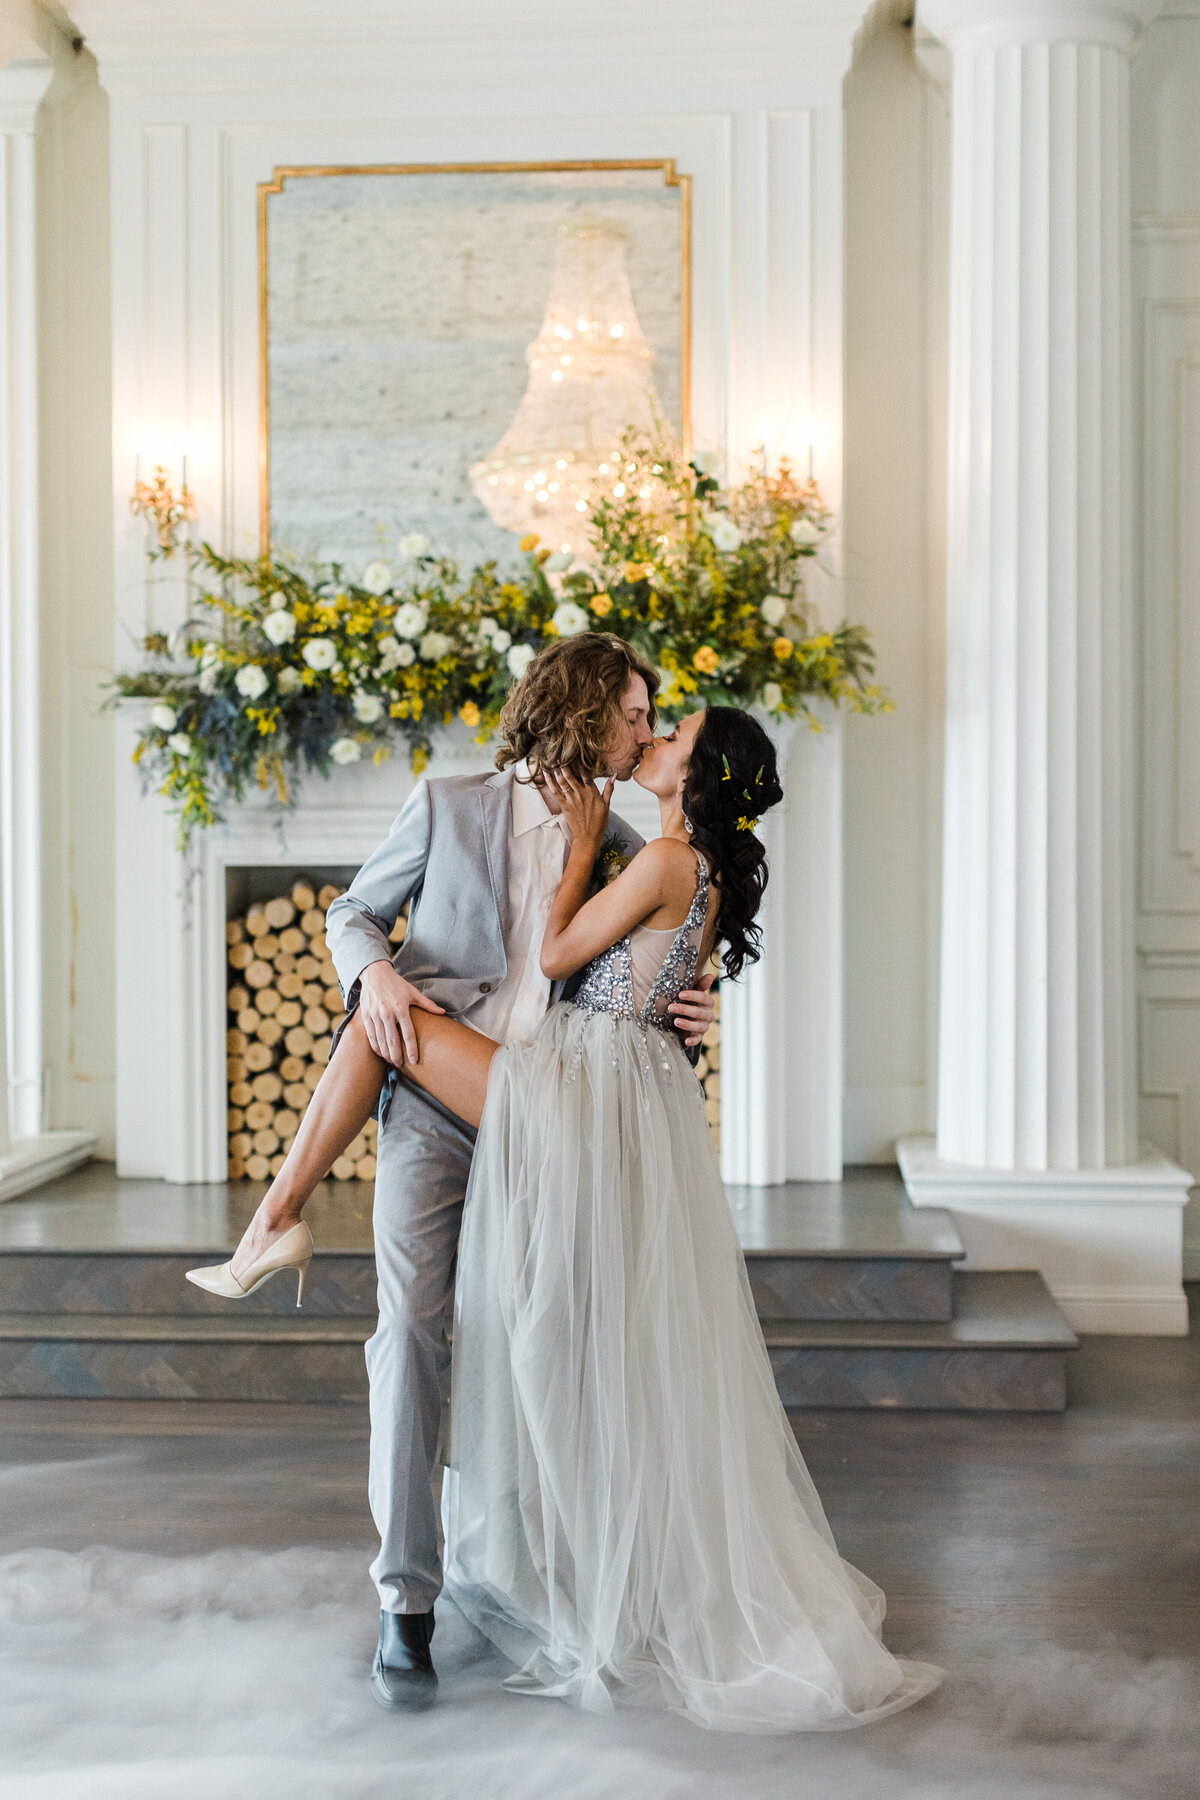 A portrait of a bride and groom sharing a passionate kiss at The Mason in Dallas, Texas. The bride is on the right and is wearing a sparkly, silver dress. The groom is on the left and is wearing a grey suit with a boutonniere. They are backed by a large, fancy fireplace adorned with a large floral arrangement.